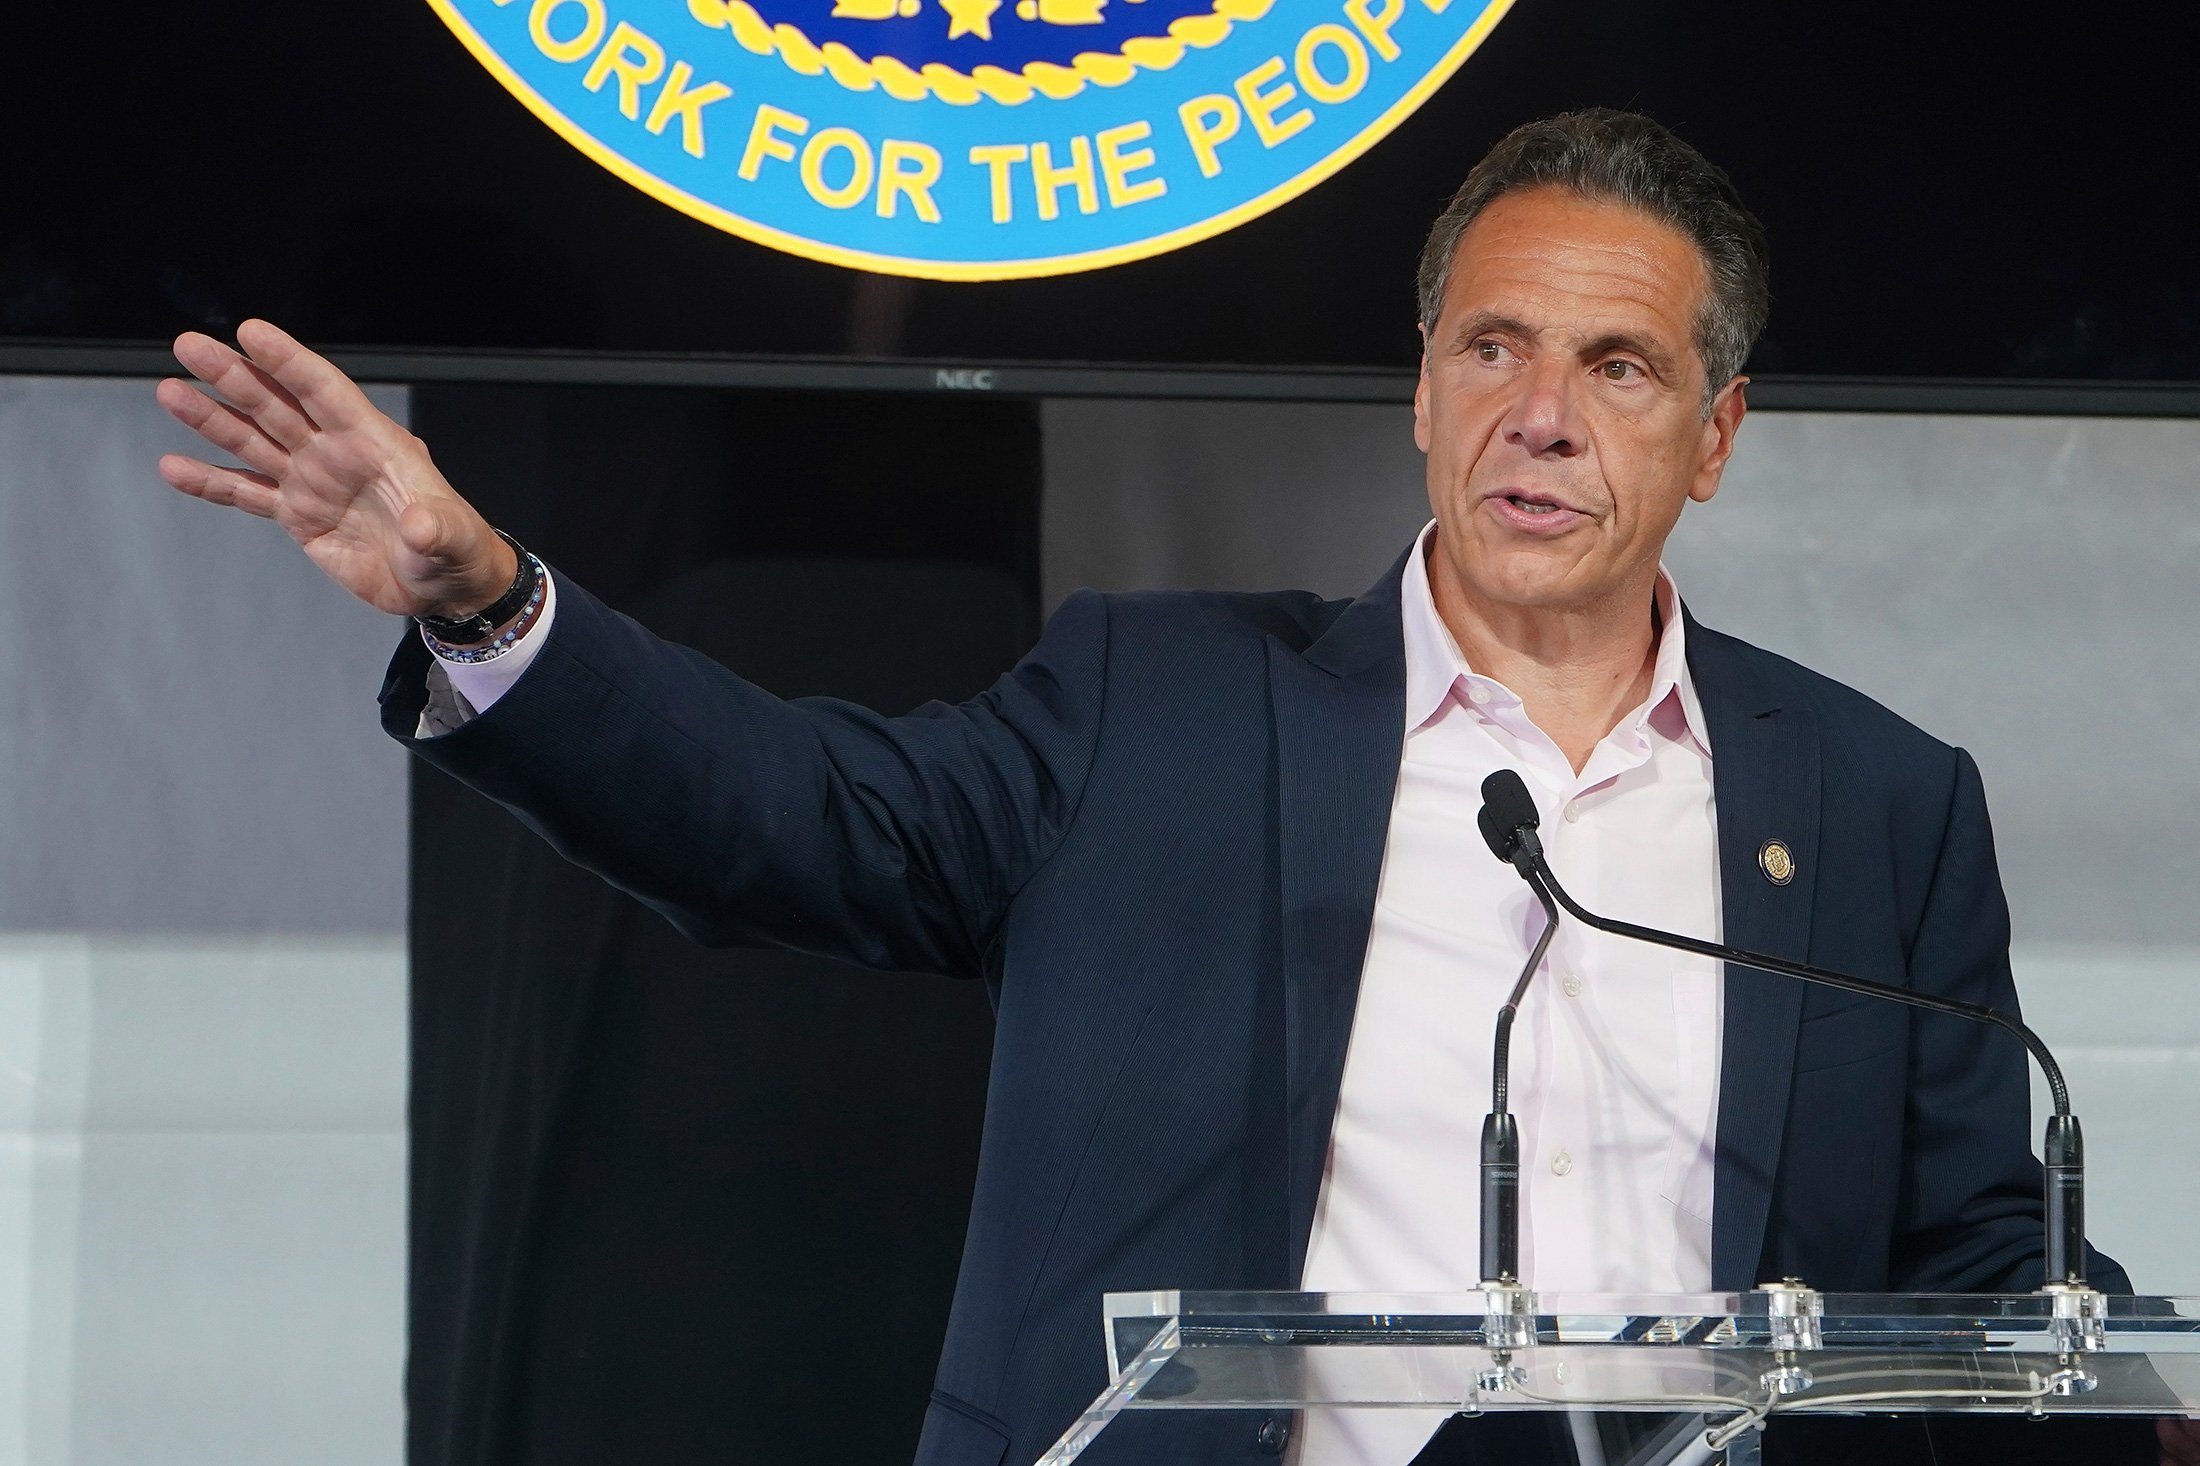 New York Governor Andrew Cuomo speaks at the opening ceremony of the Tribeca Festival in New York, U.S., June 9, 2021. (AP Photo)